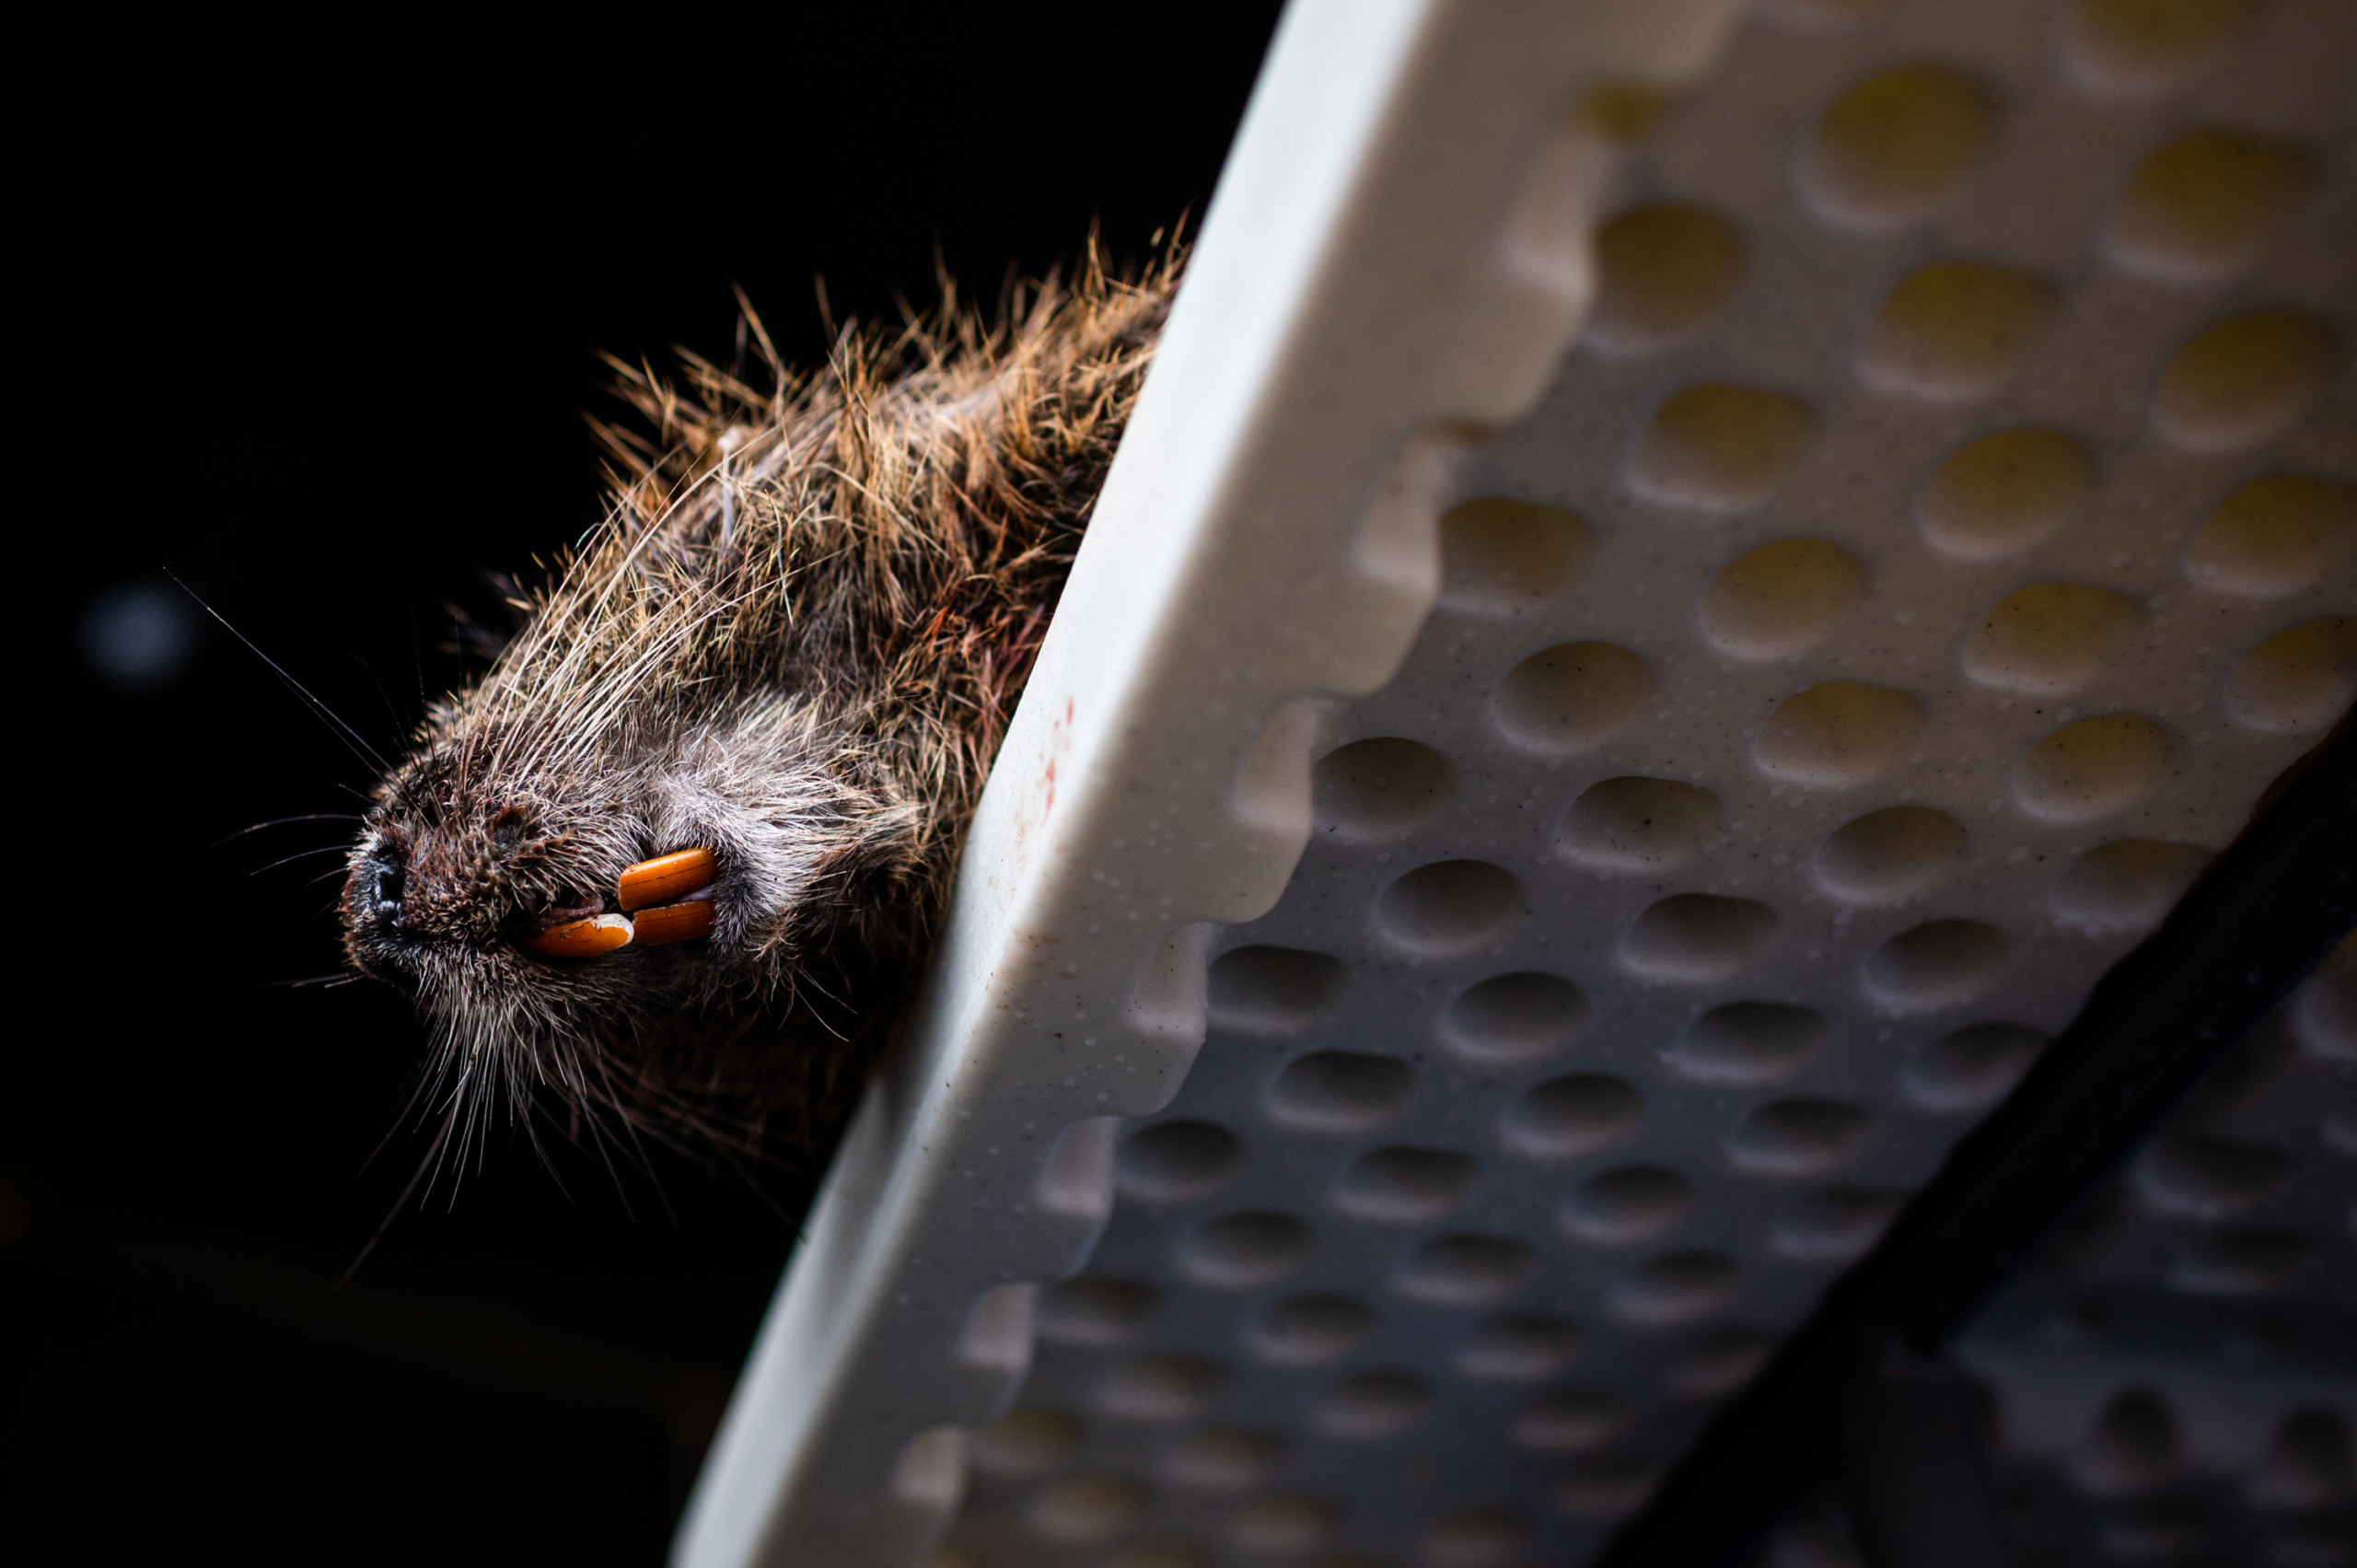 A nutria hangs over the edge of the skinning table at the Fur & Wildlife Festival